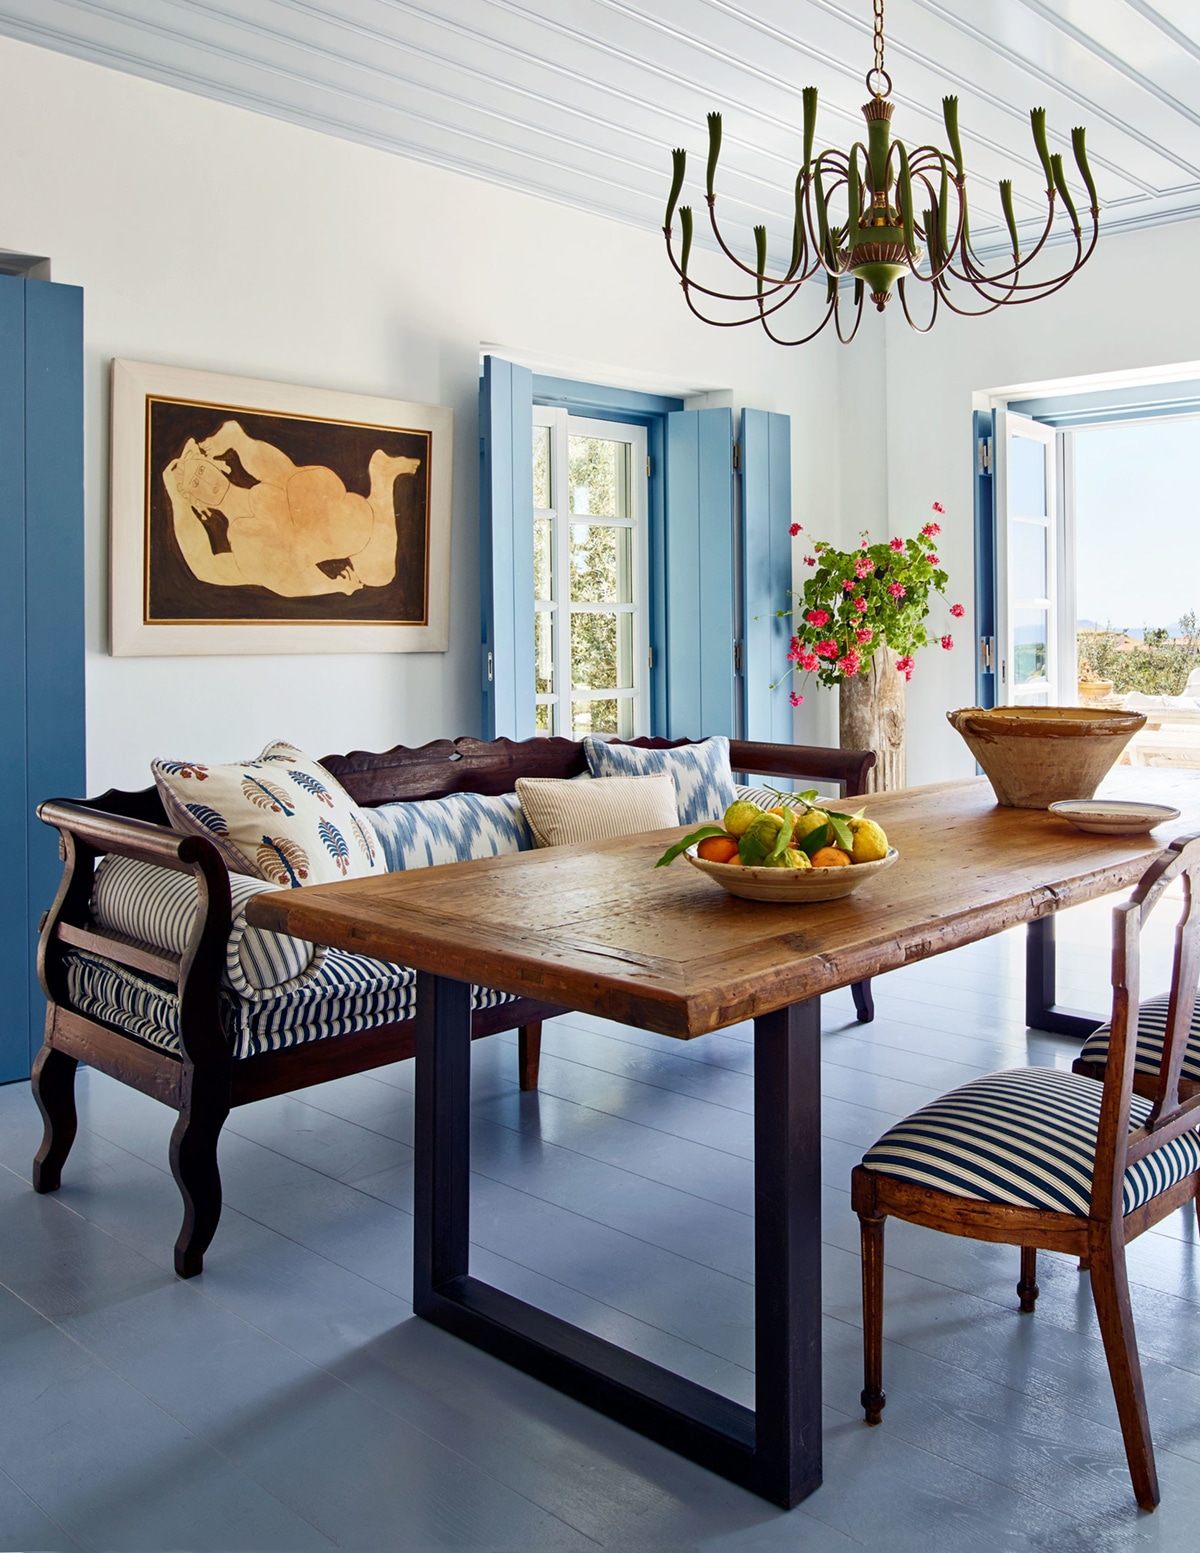 the blue and white dining room in this greek island home is balanced by warm wood antiqiues | house tour via coco kelley